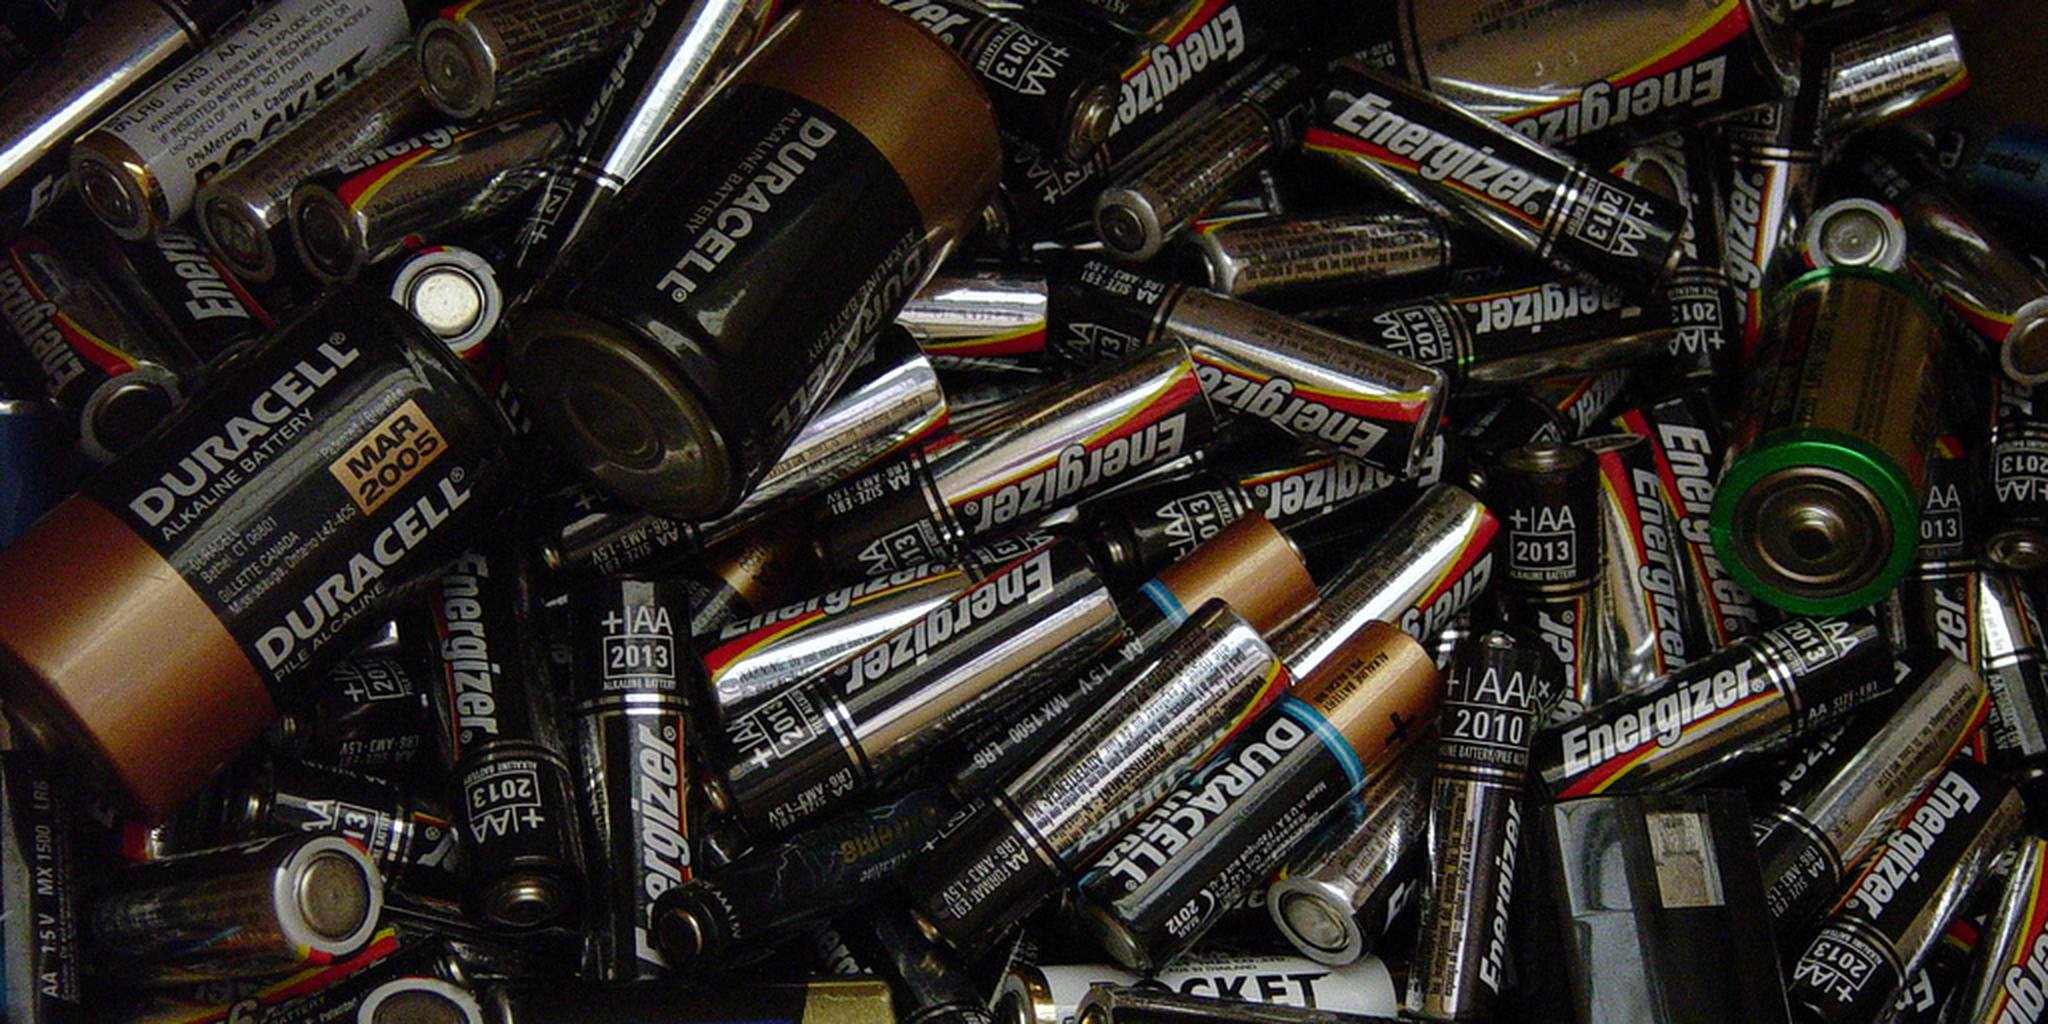 All about Batteries